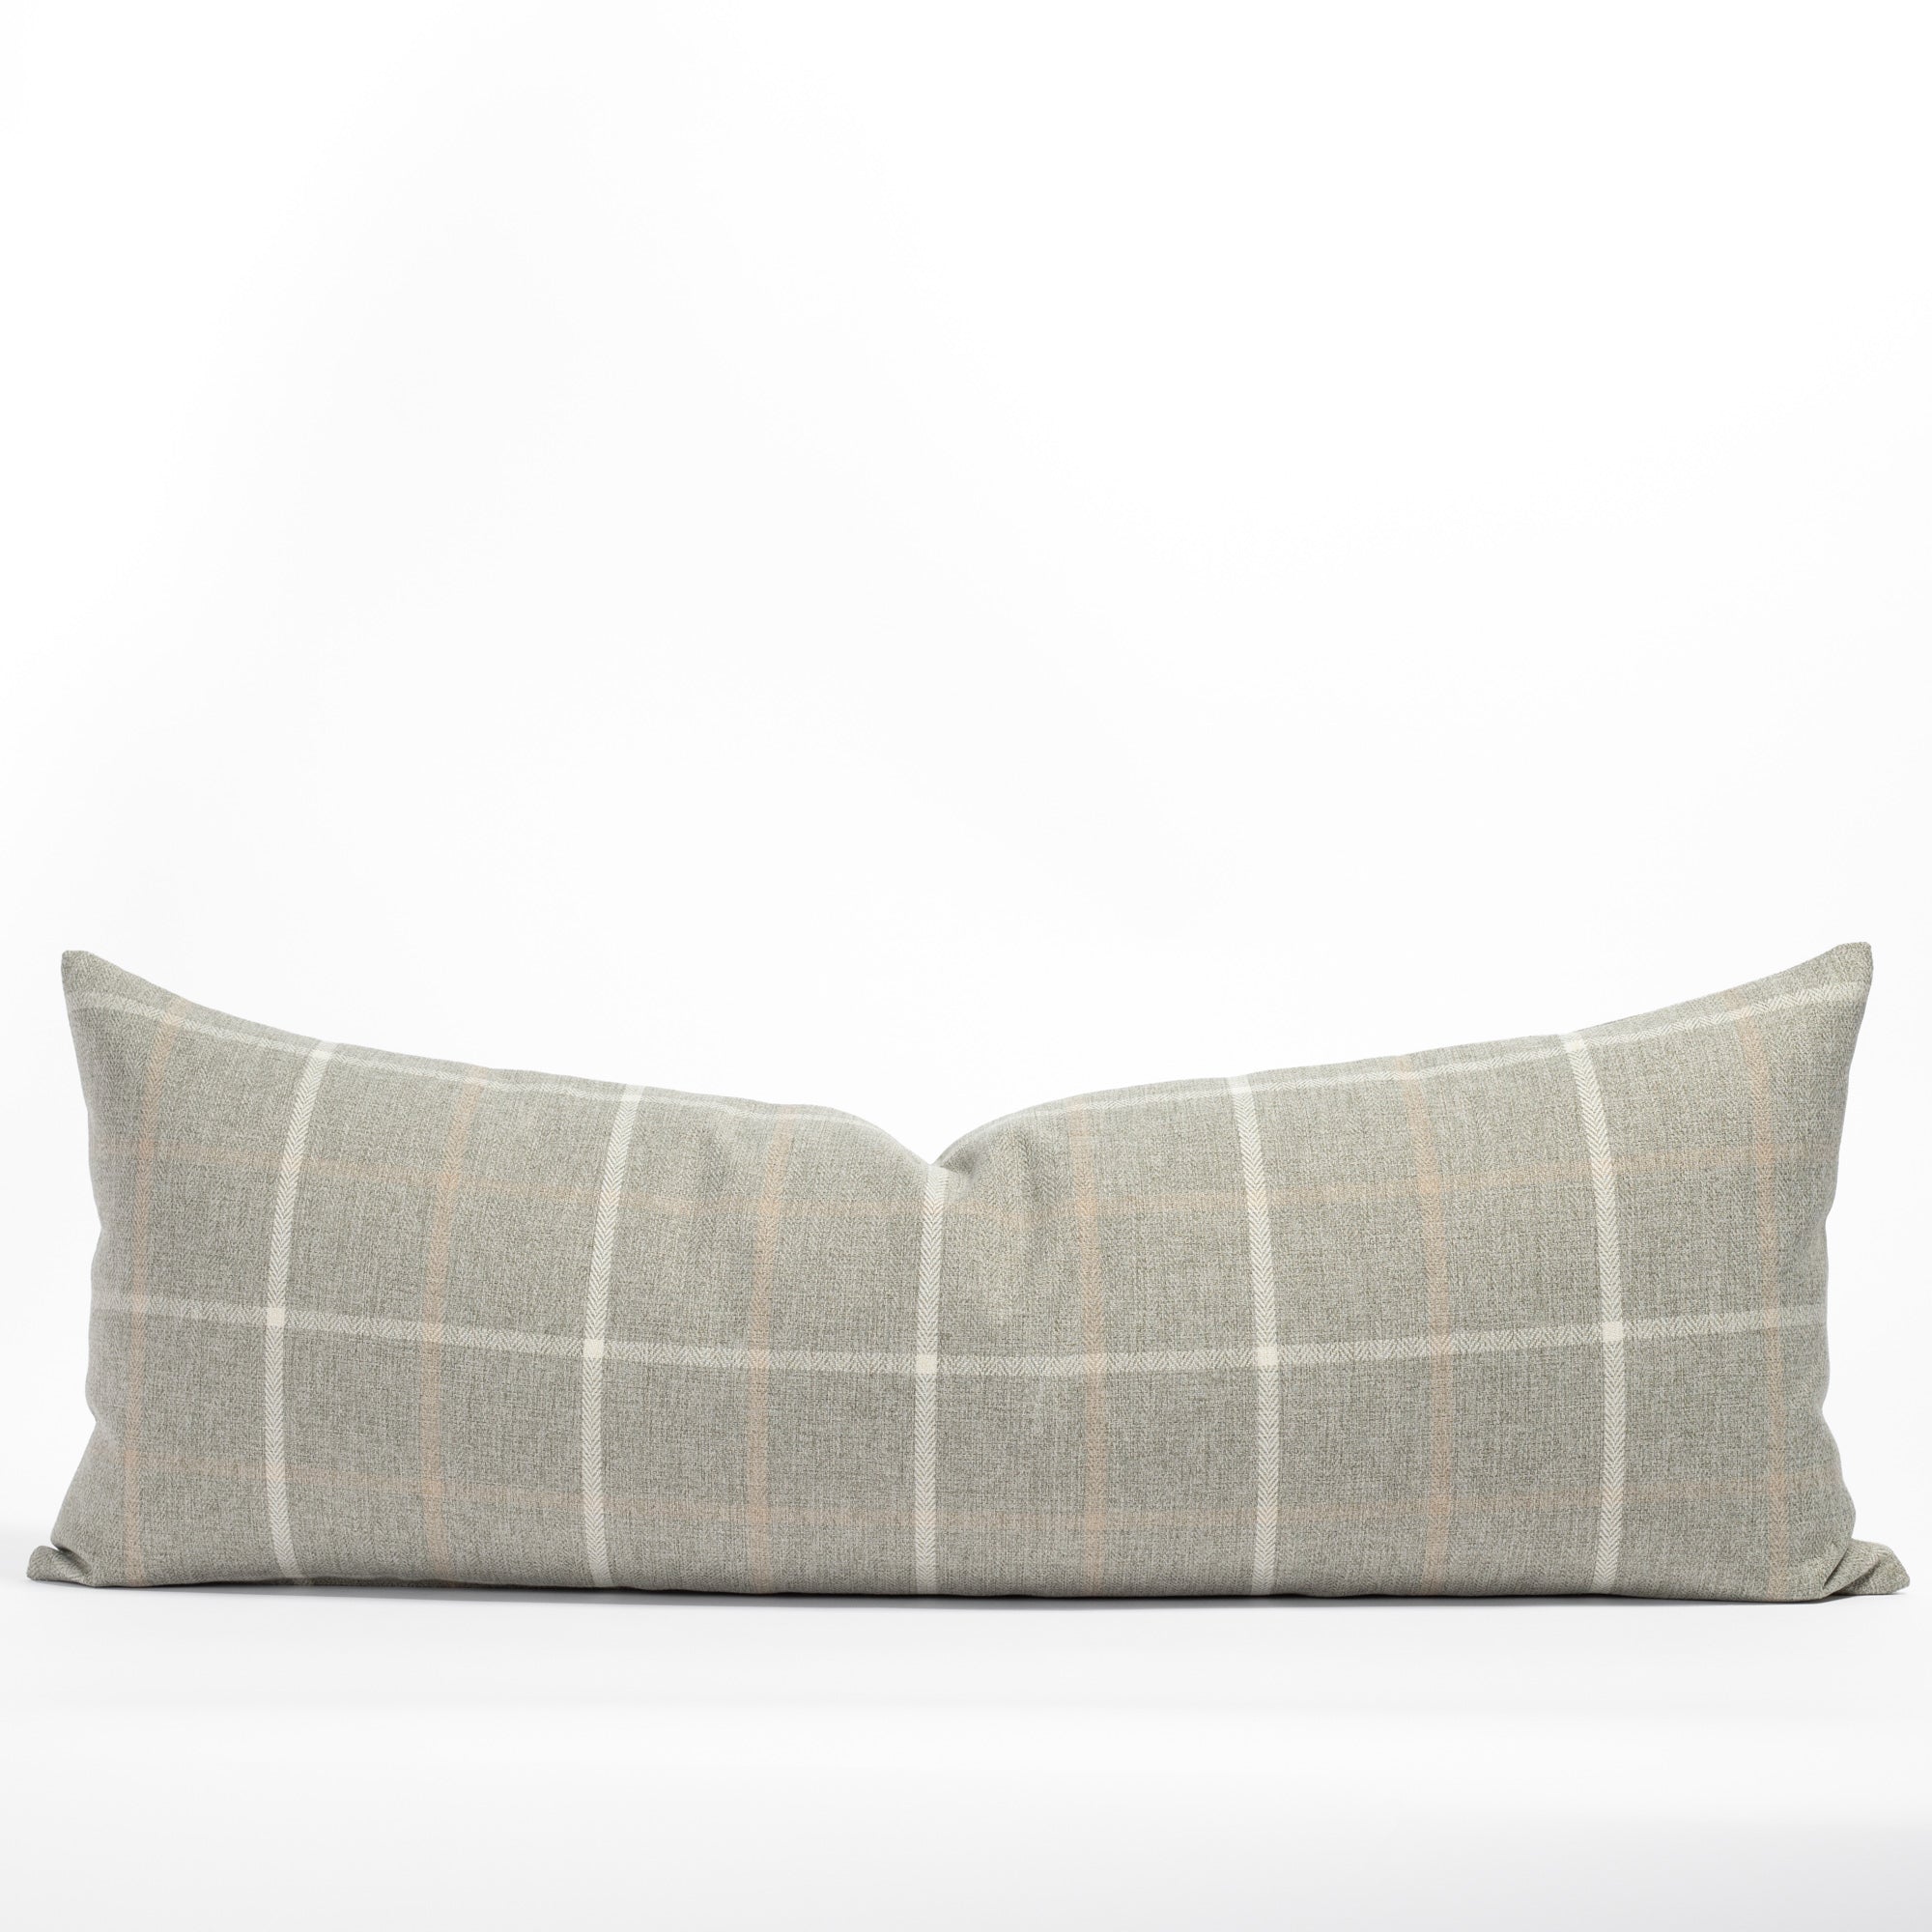 Camden Plaid Bolster Pillow, a grey, cream and camel plaid bed pillow from Tonic Living